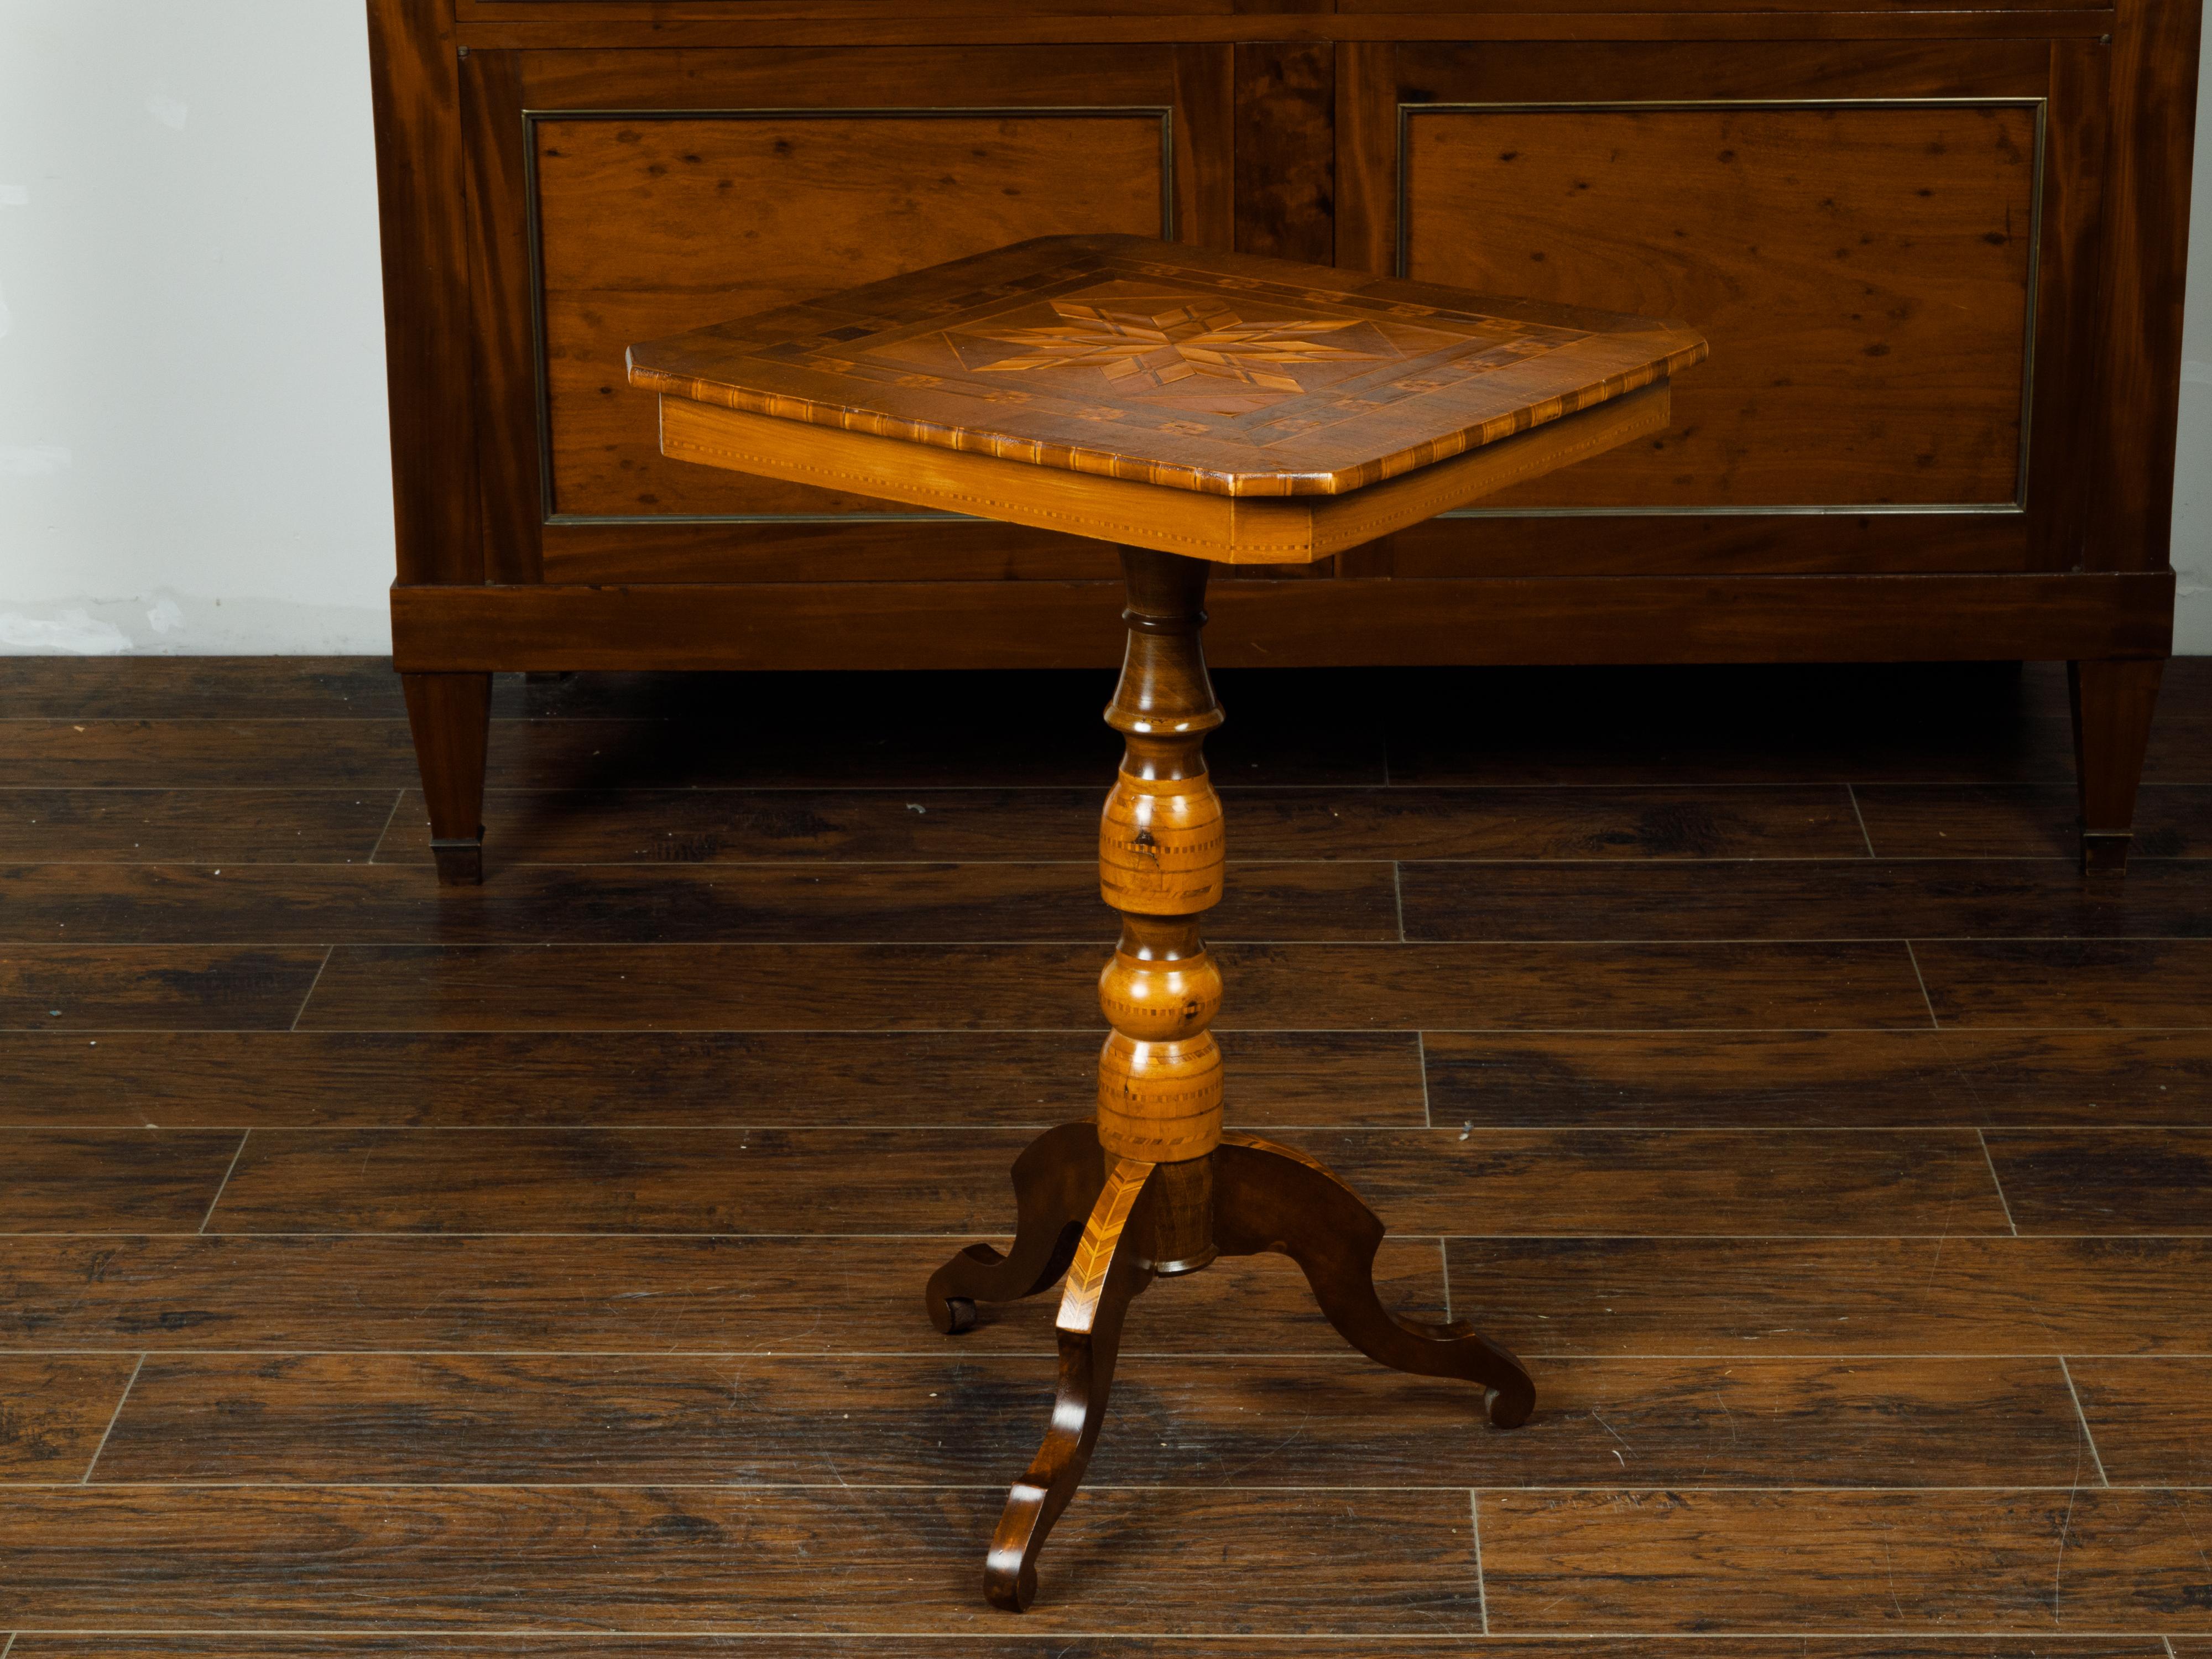 Italian 1880s Guéridon Pedestal Table with Marquetry Décor and Tripod Base For Sale 2